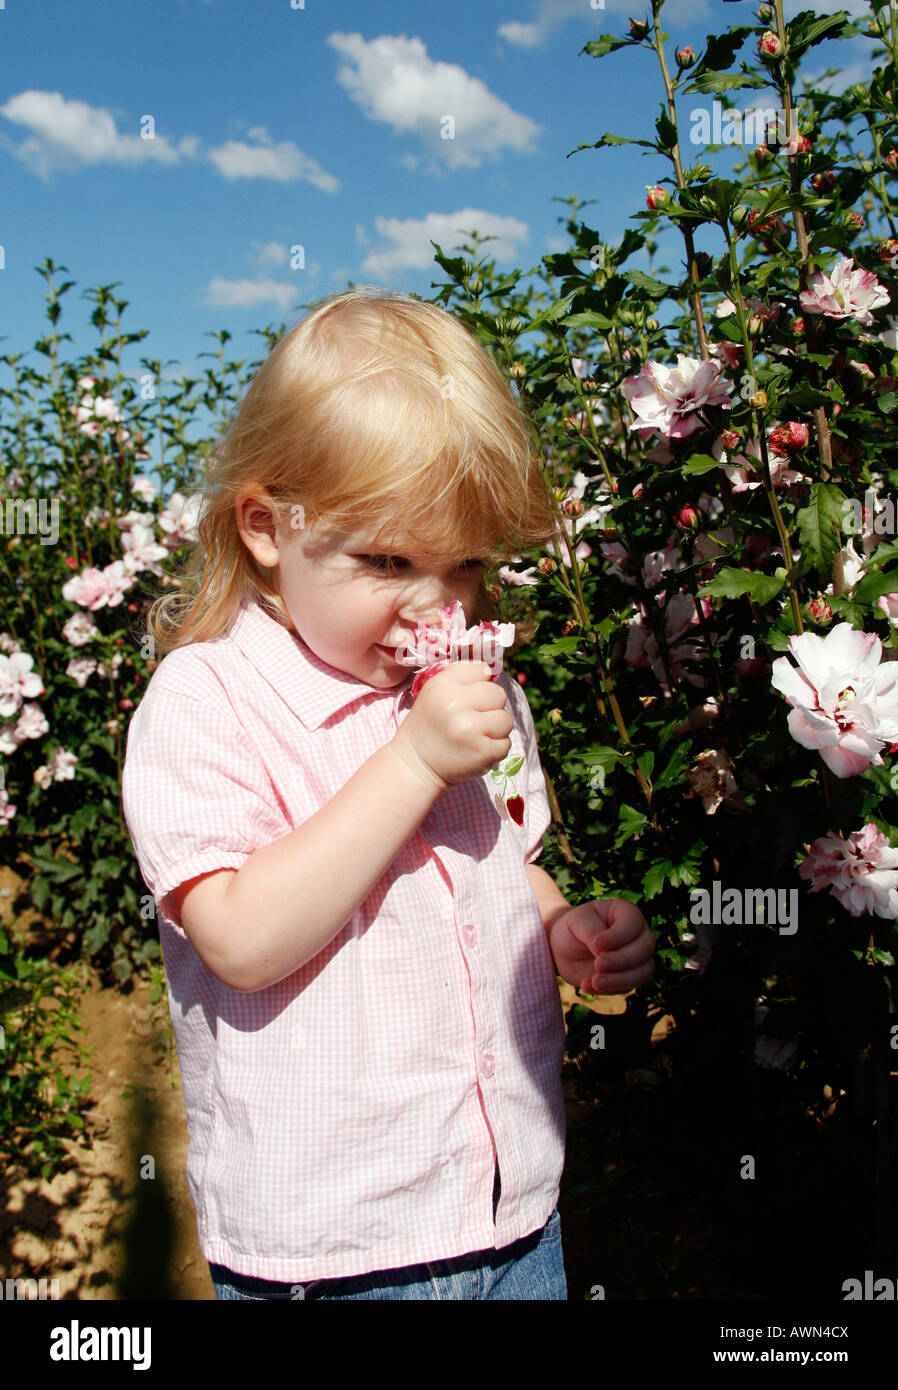 Young girl in a flower meadow Stock Photo